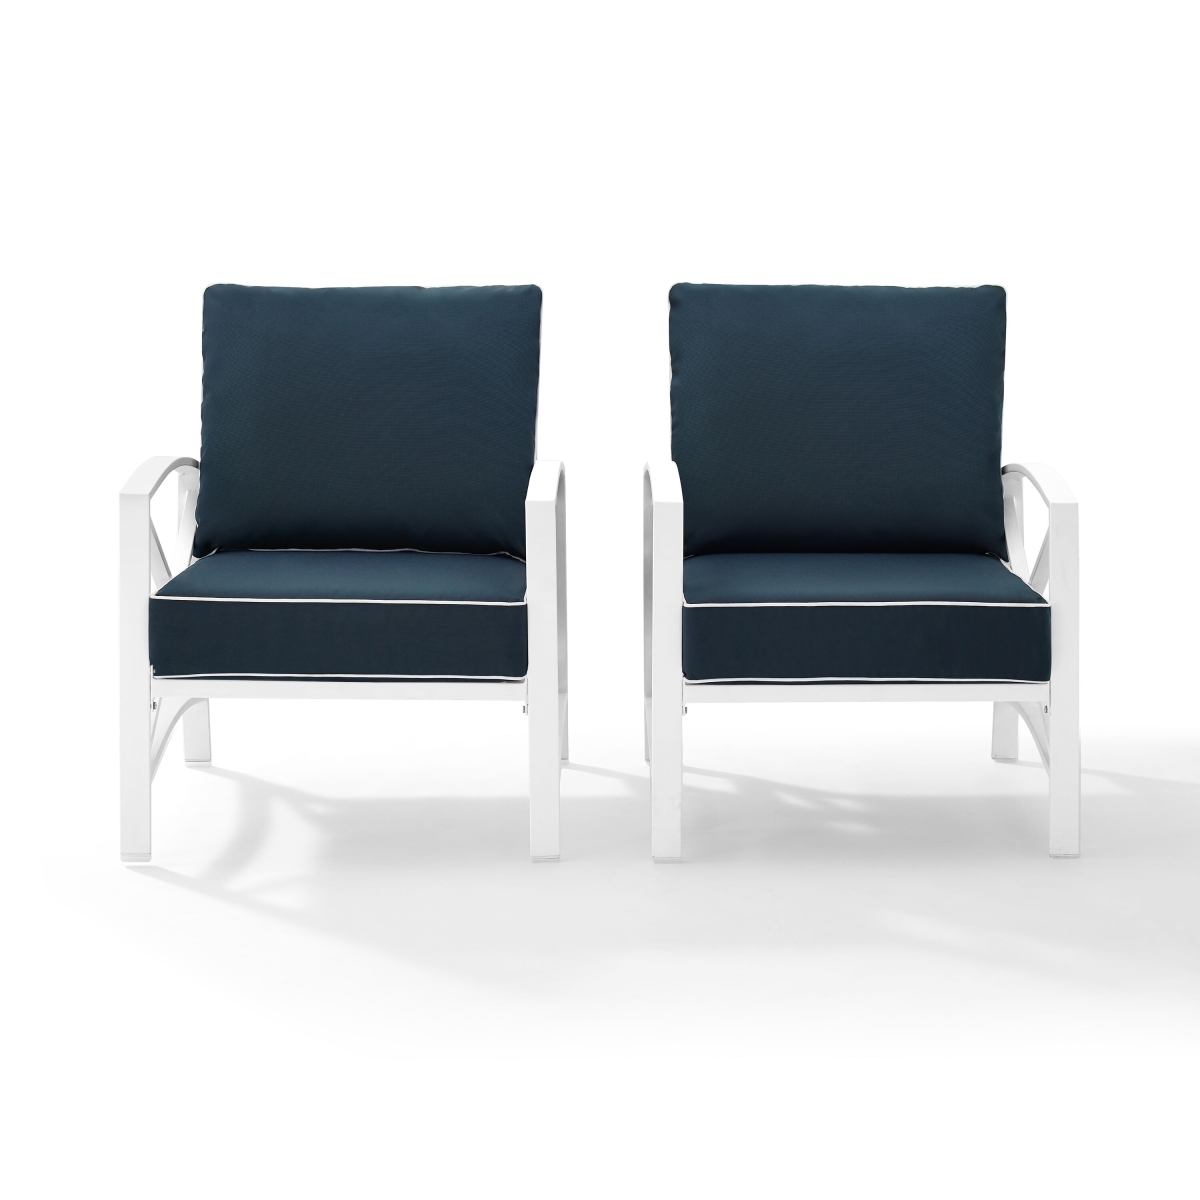 Ko60013wh-nv Kaplan 2-piece Outdoor Seating Set In White With Navy Cushions